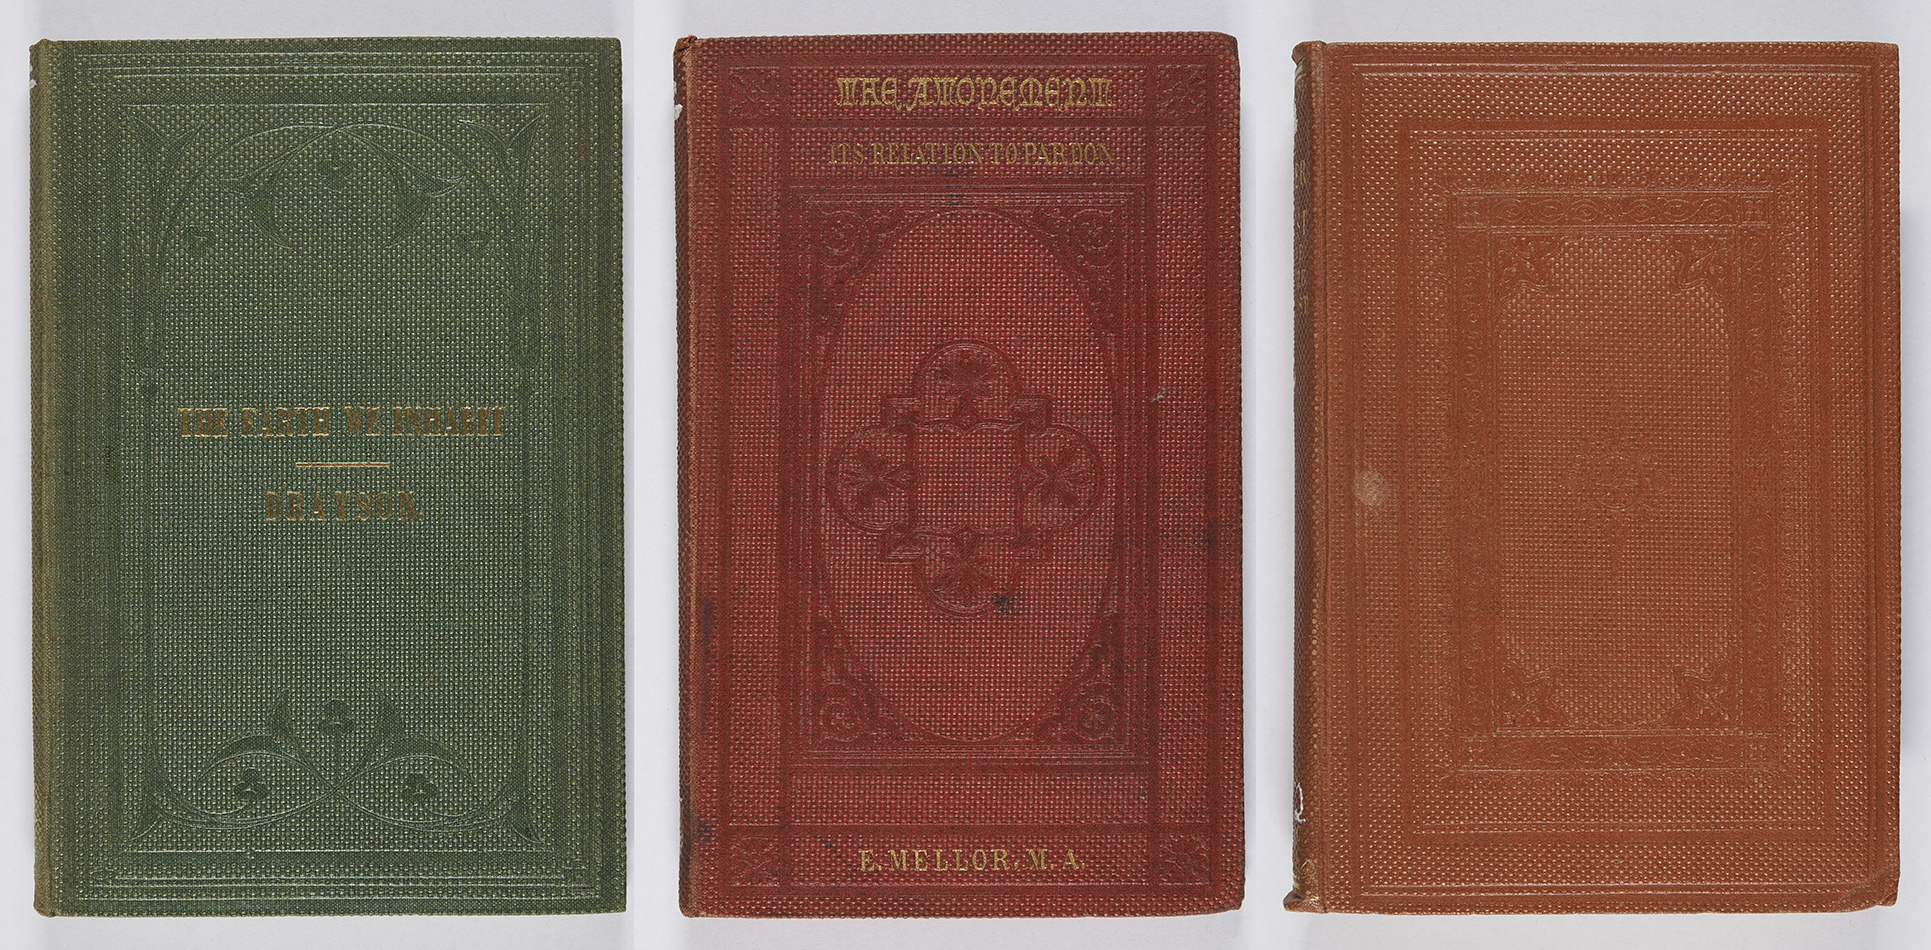 Some examples of bead grain cloth bindings, all blocked in blind; the first has a very Art Nouveau feel to the blocked design. Alfred W. Drayson. The earth we inhabit: is past, present, and probable future (London: A.W. Bennett, 1859), s GA8.D7 ; Enoch Mellor, The atonement, its relation to pardon (London: Hamilton, Adams, & Co., 1860), s BT265.M3 ; A.J. Campbell, The power of Jesus Christ to save unto the uttermost (London: James Nisbet and Co., 1859), s BT205.C2. 